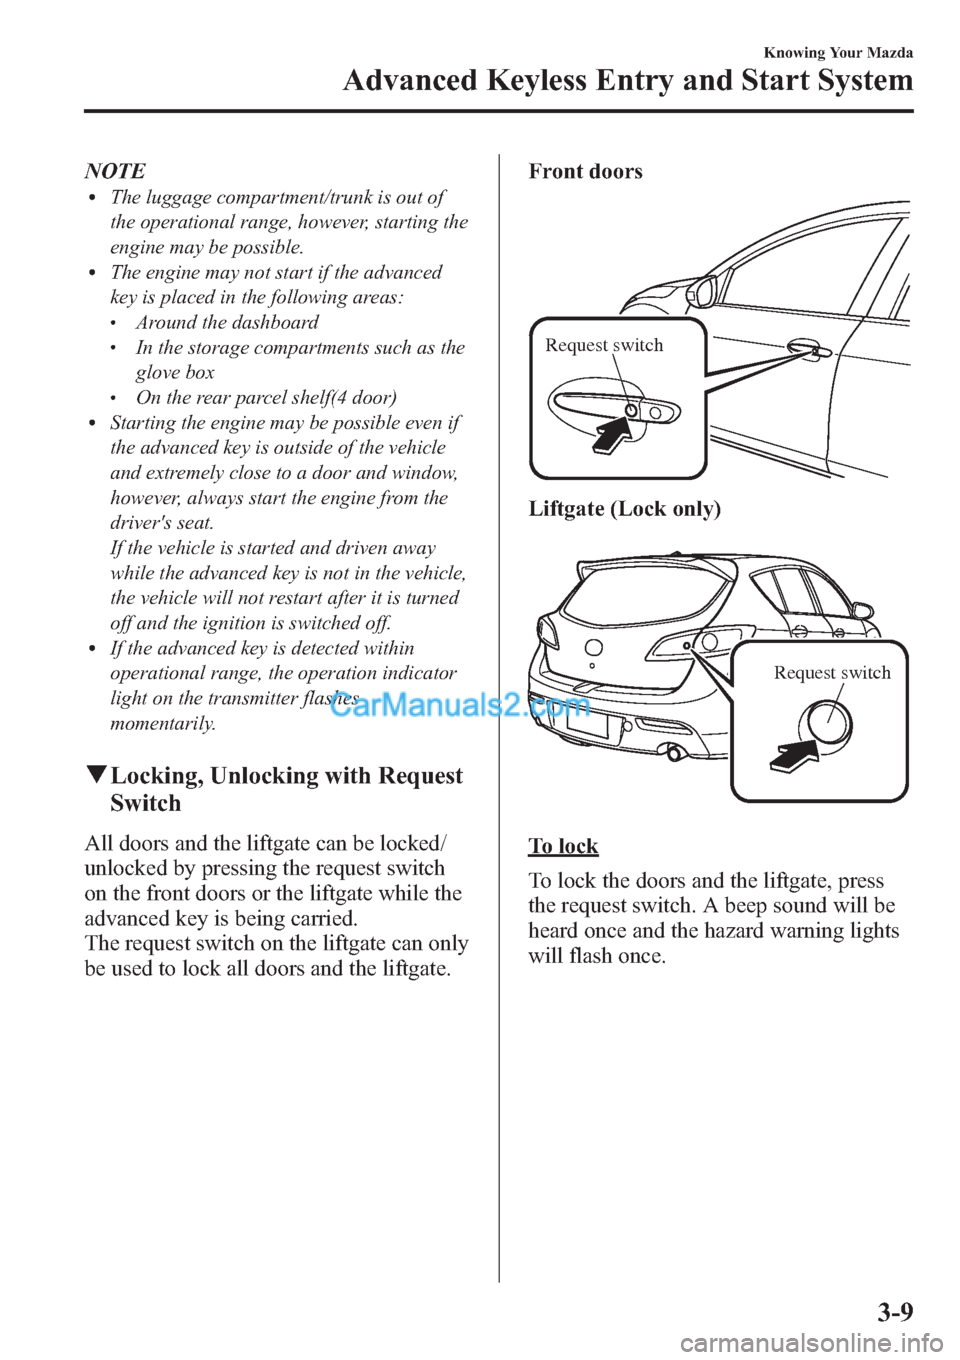 MAZDA MODEL MAZDASPEED 3 2013  Owners Manual (in English) NOTElThe luggage compartment/trunk is out of
the operational range, however, starting the
engine may be possible.
lThe engine may not start if the advanced
key is placed in the following areas:
lAroun